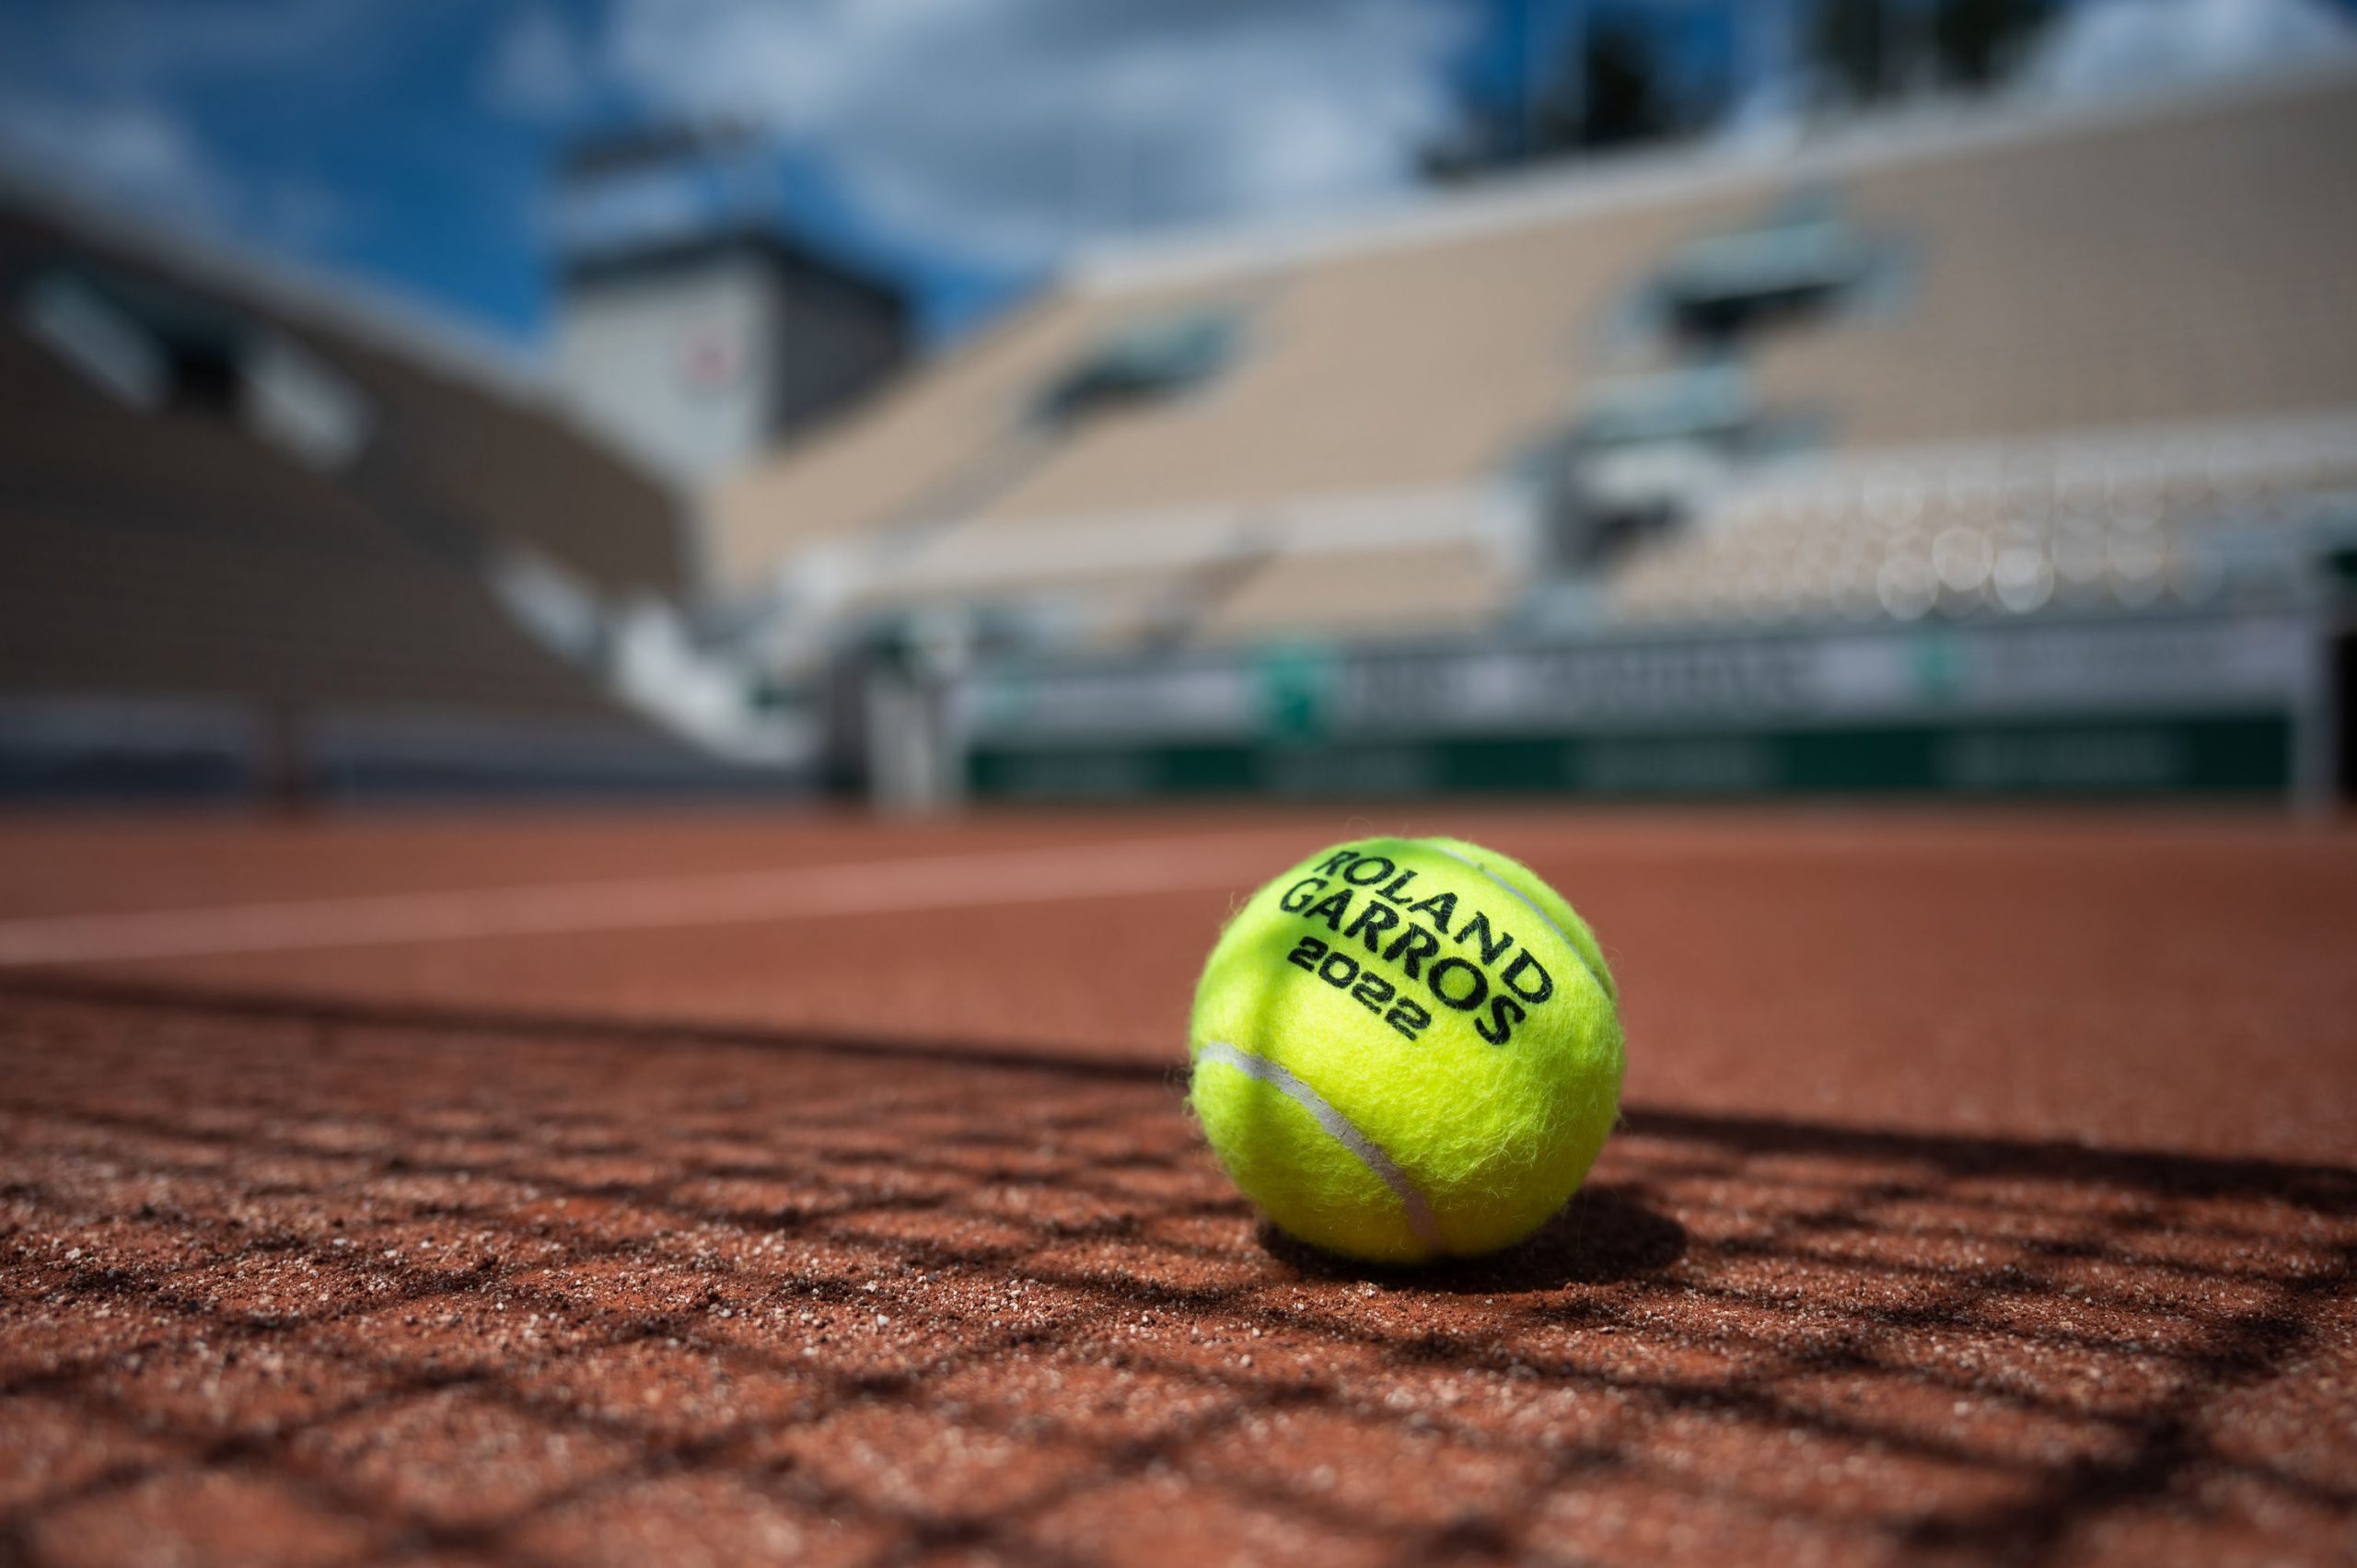 French Open 2022: When and where to watch the upcoming Grand Slam